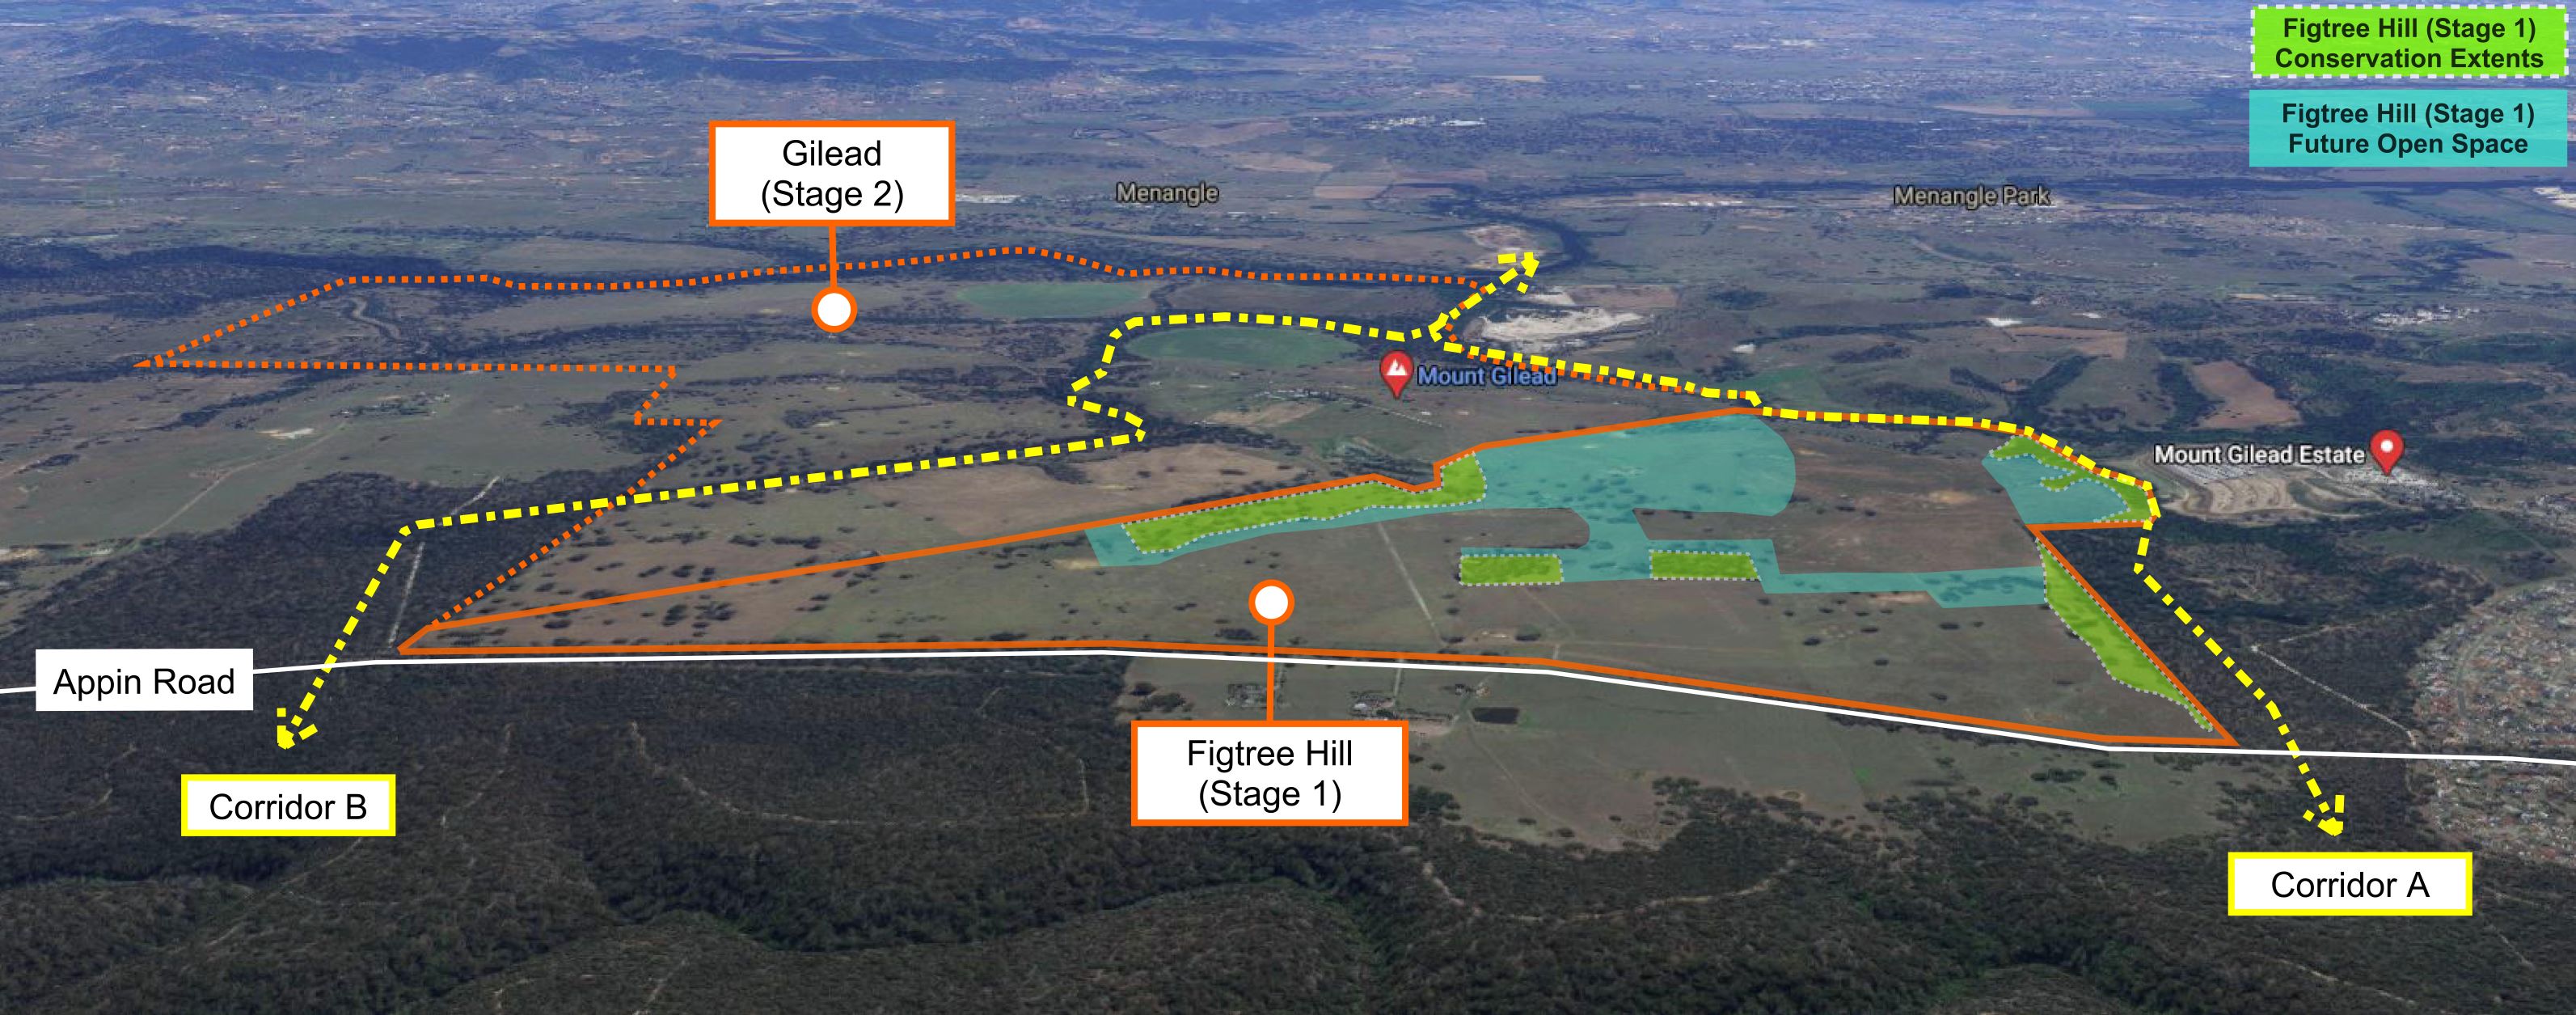 Koala migration routes around the Figtree Hill development at Gilead